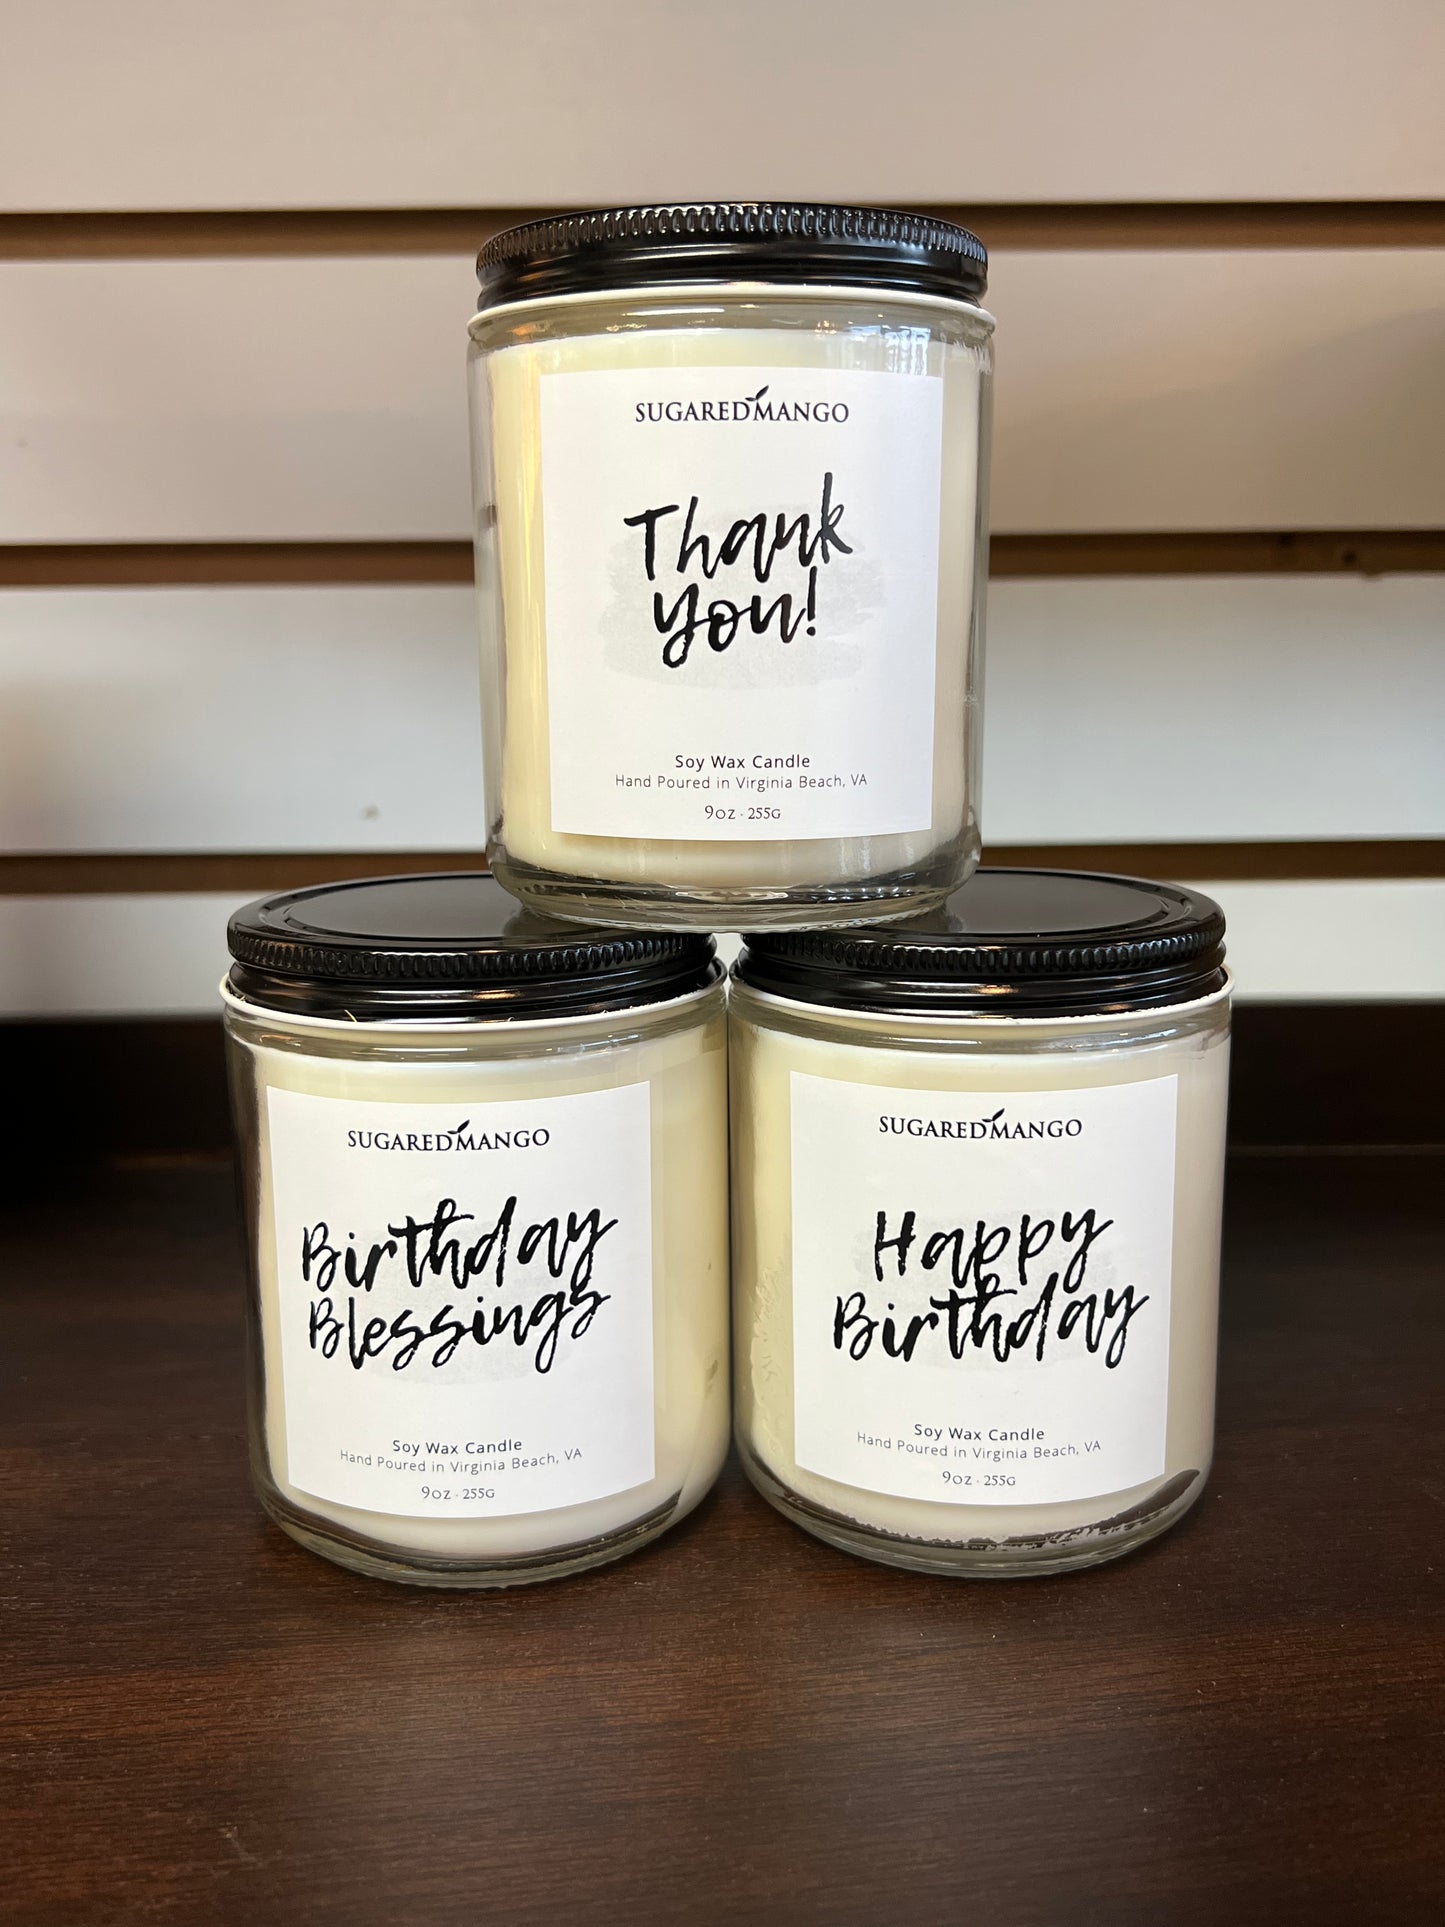 Message Candles Sugared Mango Soaps